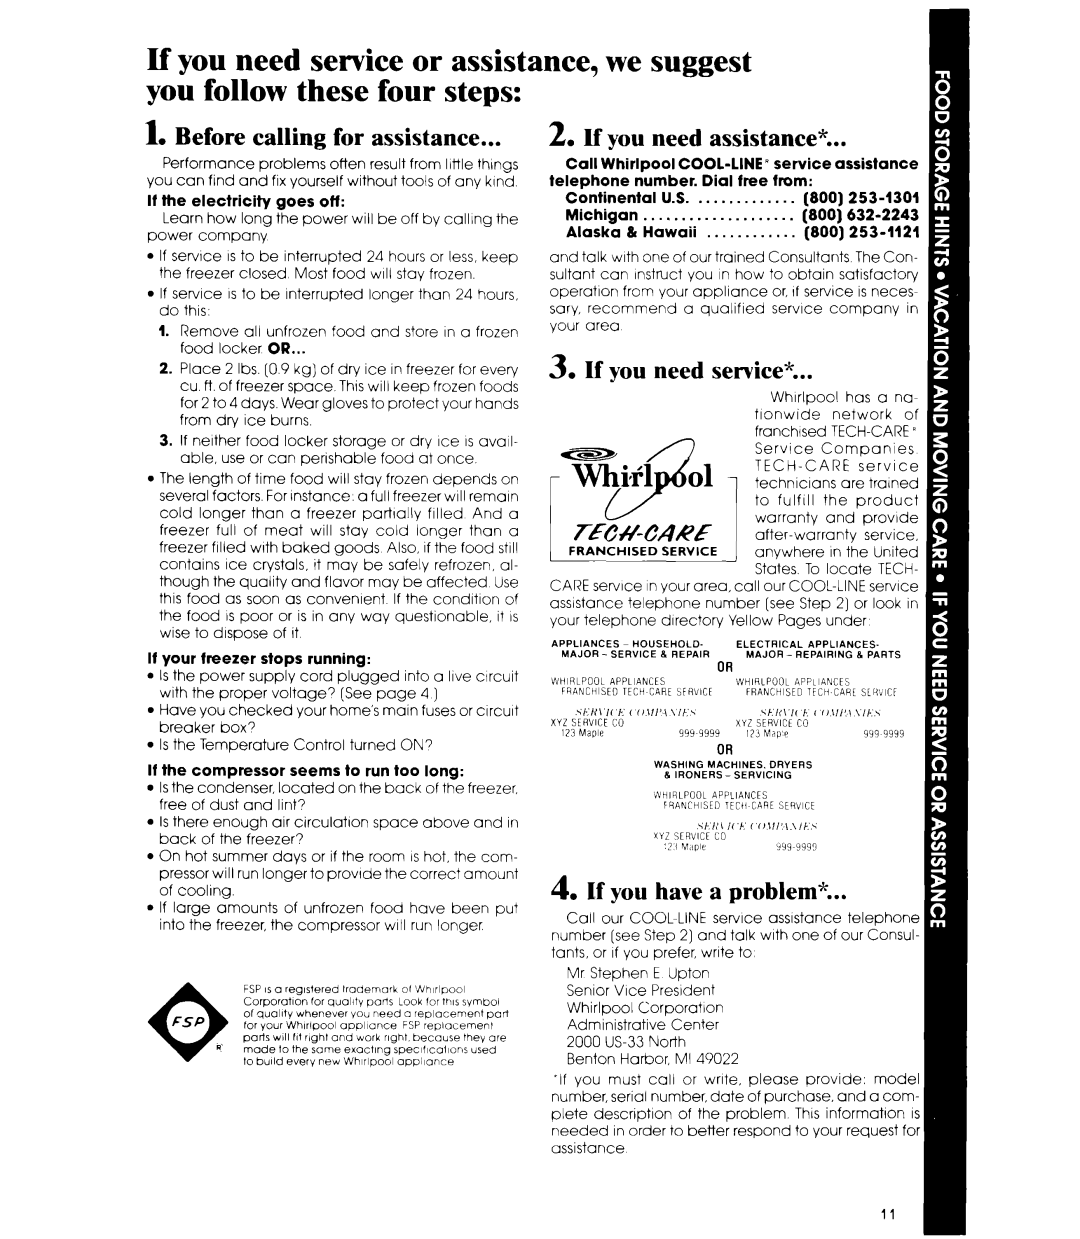 Whirlpool EVISHEXP manual Before calling for assistance, If you need assistance, If you need service, If you have a problem 